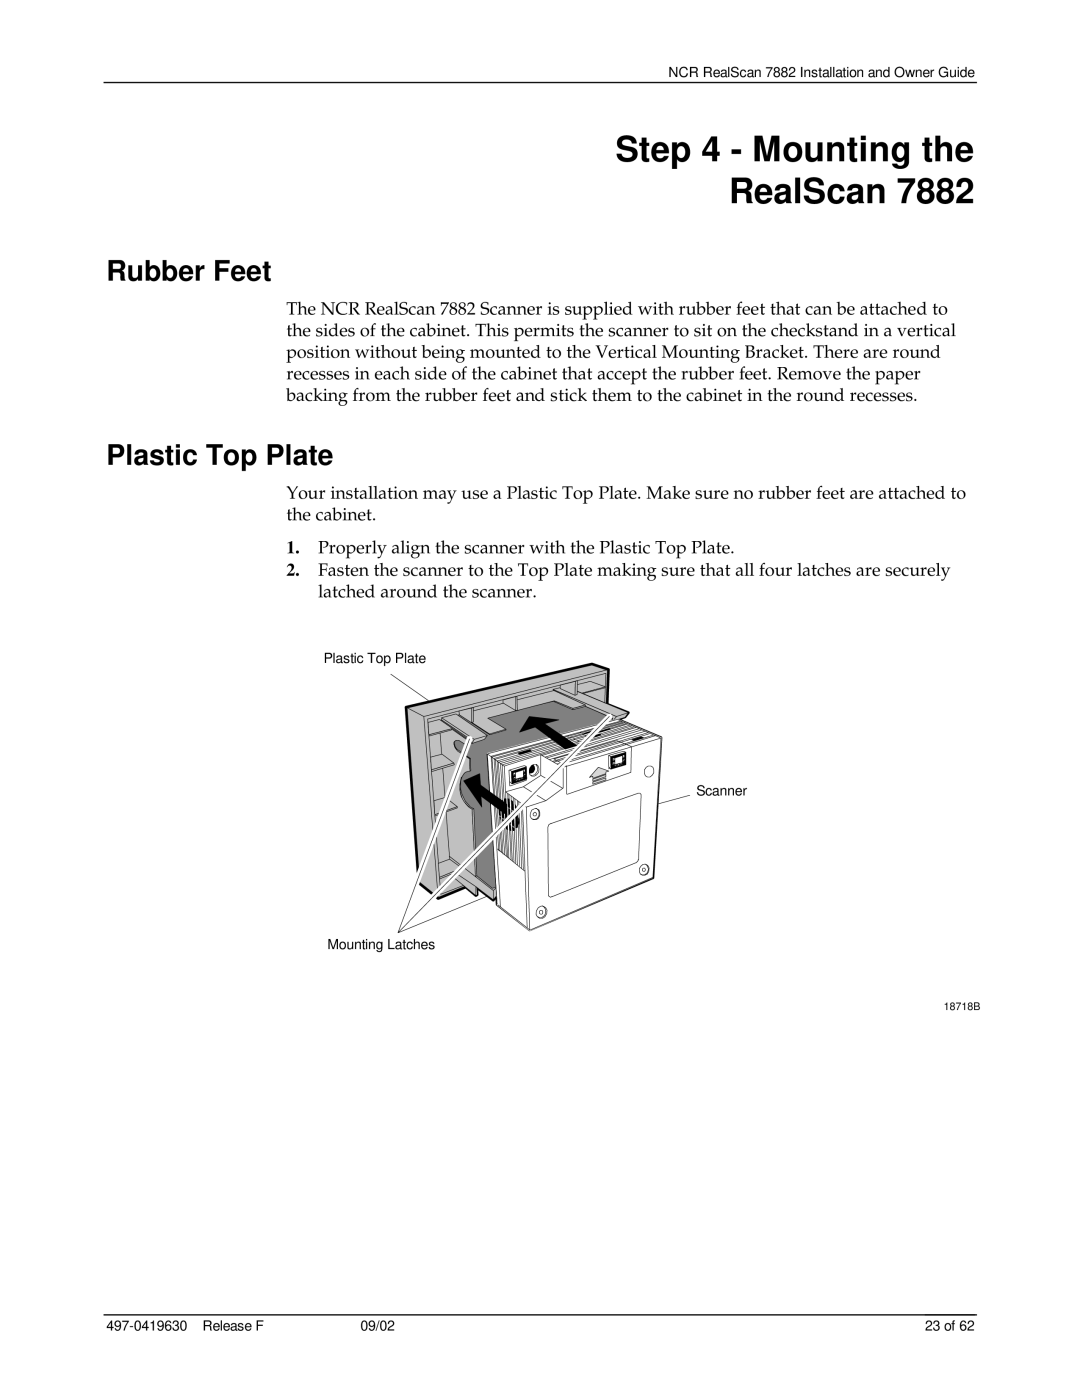 NCR 7882 manual Mounting the RealScan, Rubber Feet, Plastic Top Plate 